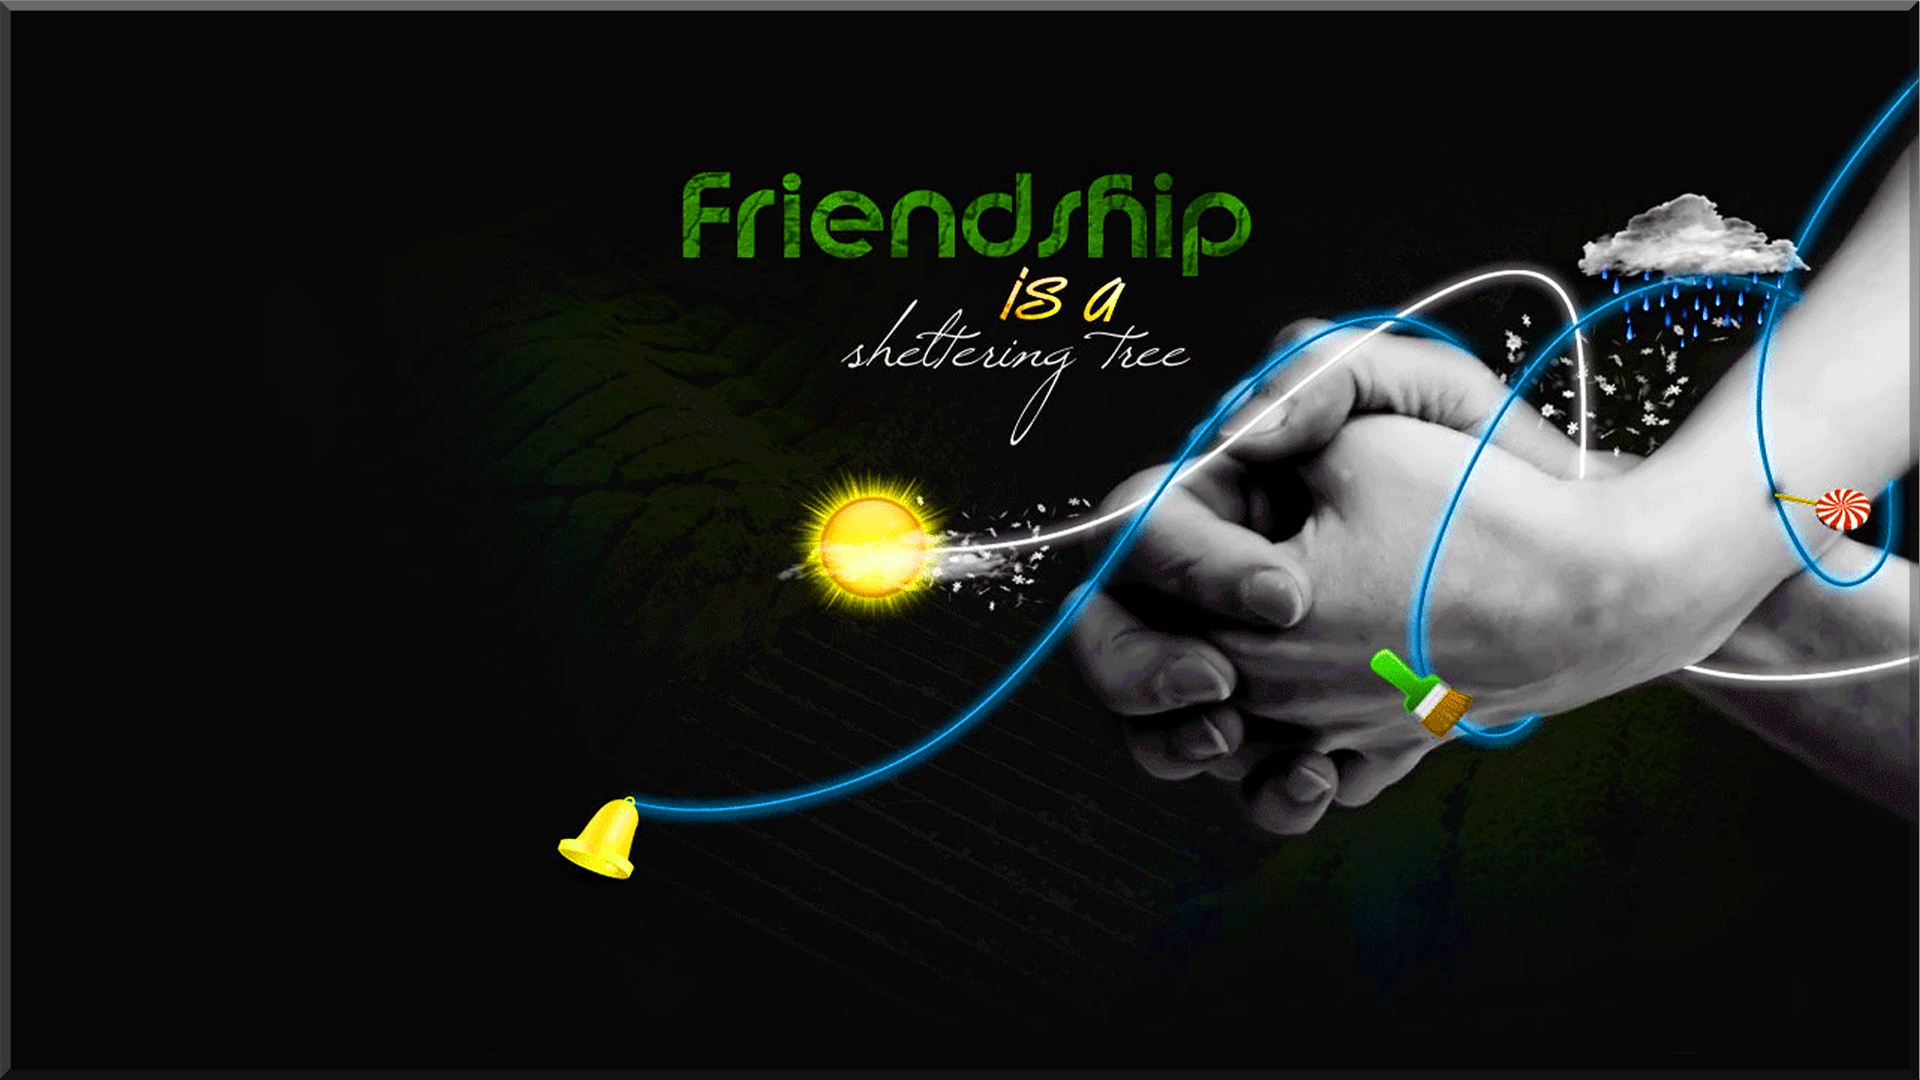 Friendship Quotes HD Wallpapers - Wallpaper, High ...